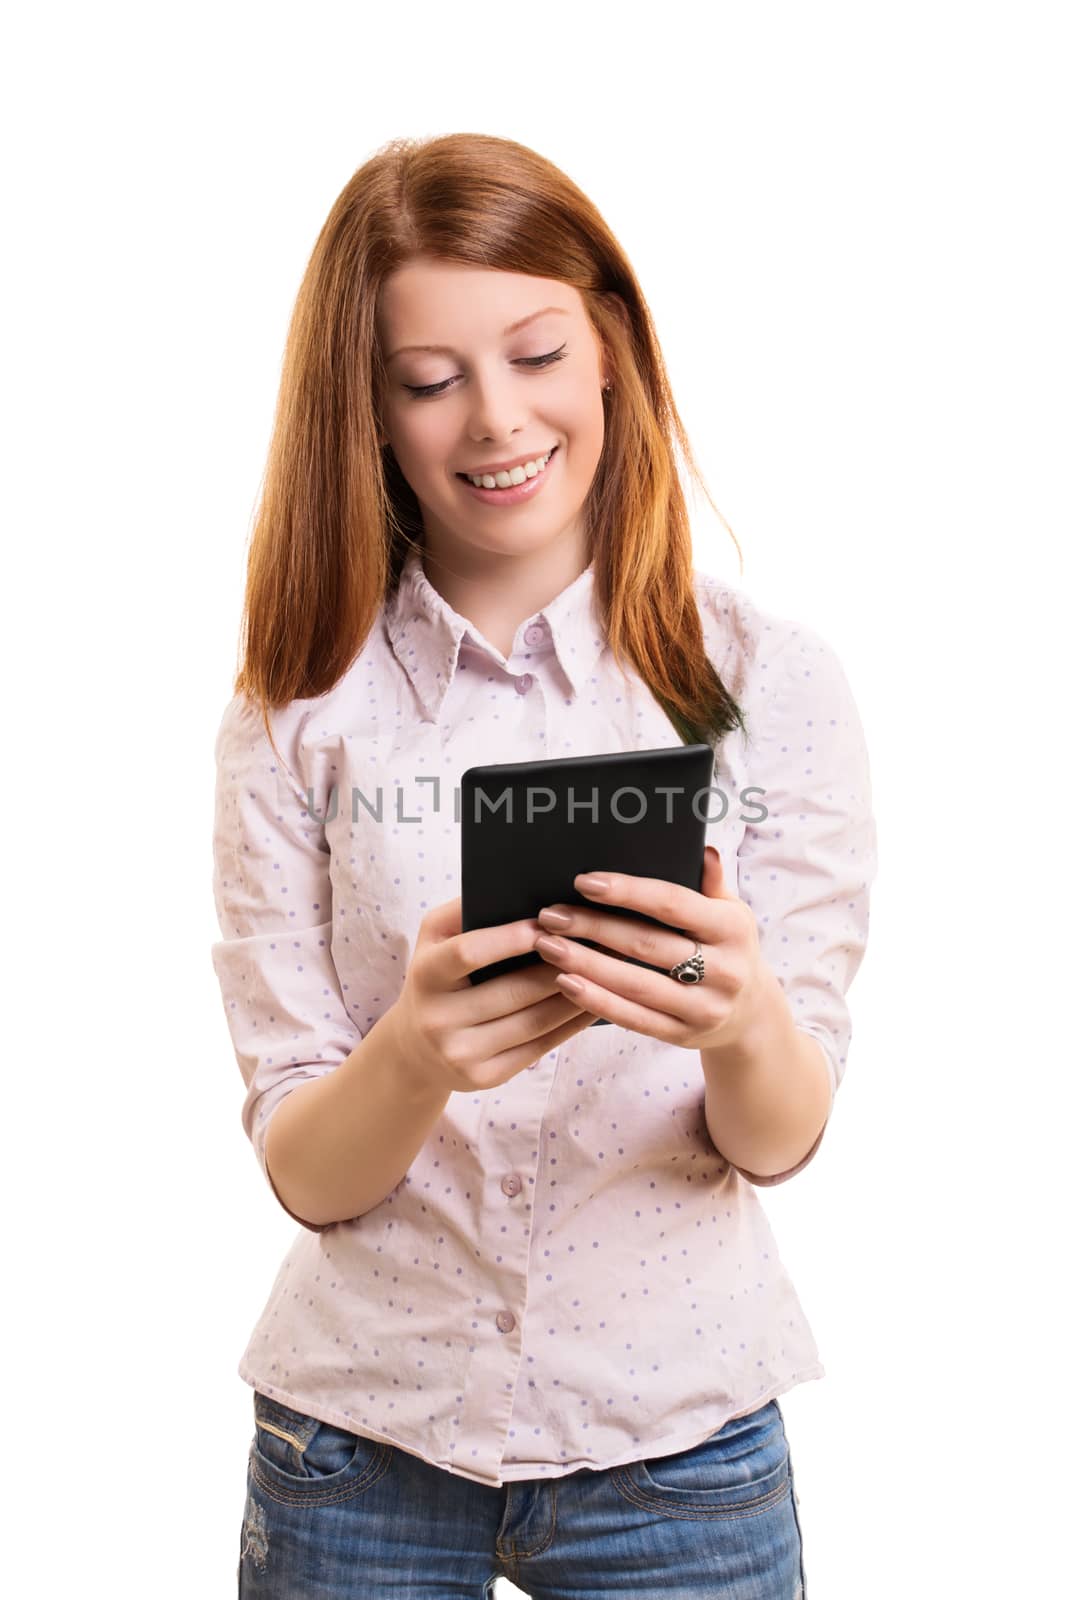 Smiling female student holding a tablet by Mendelex